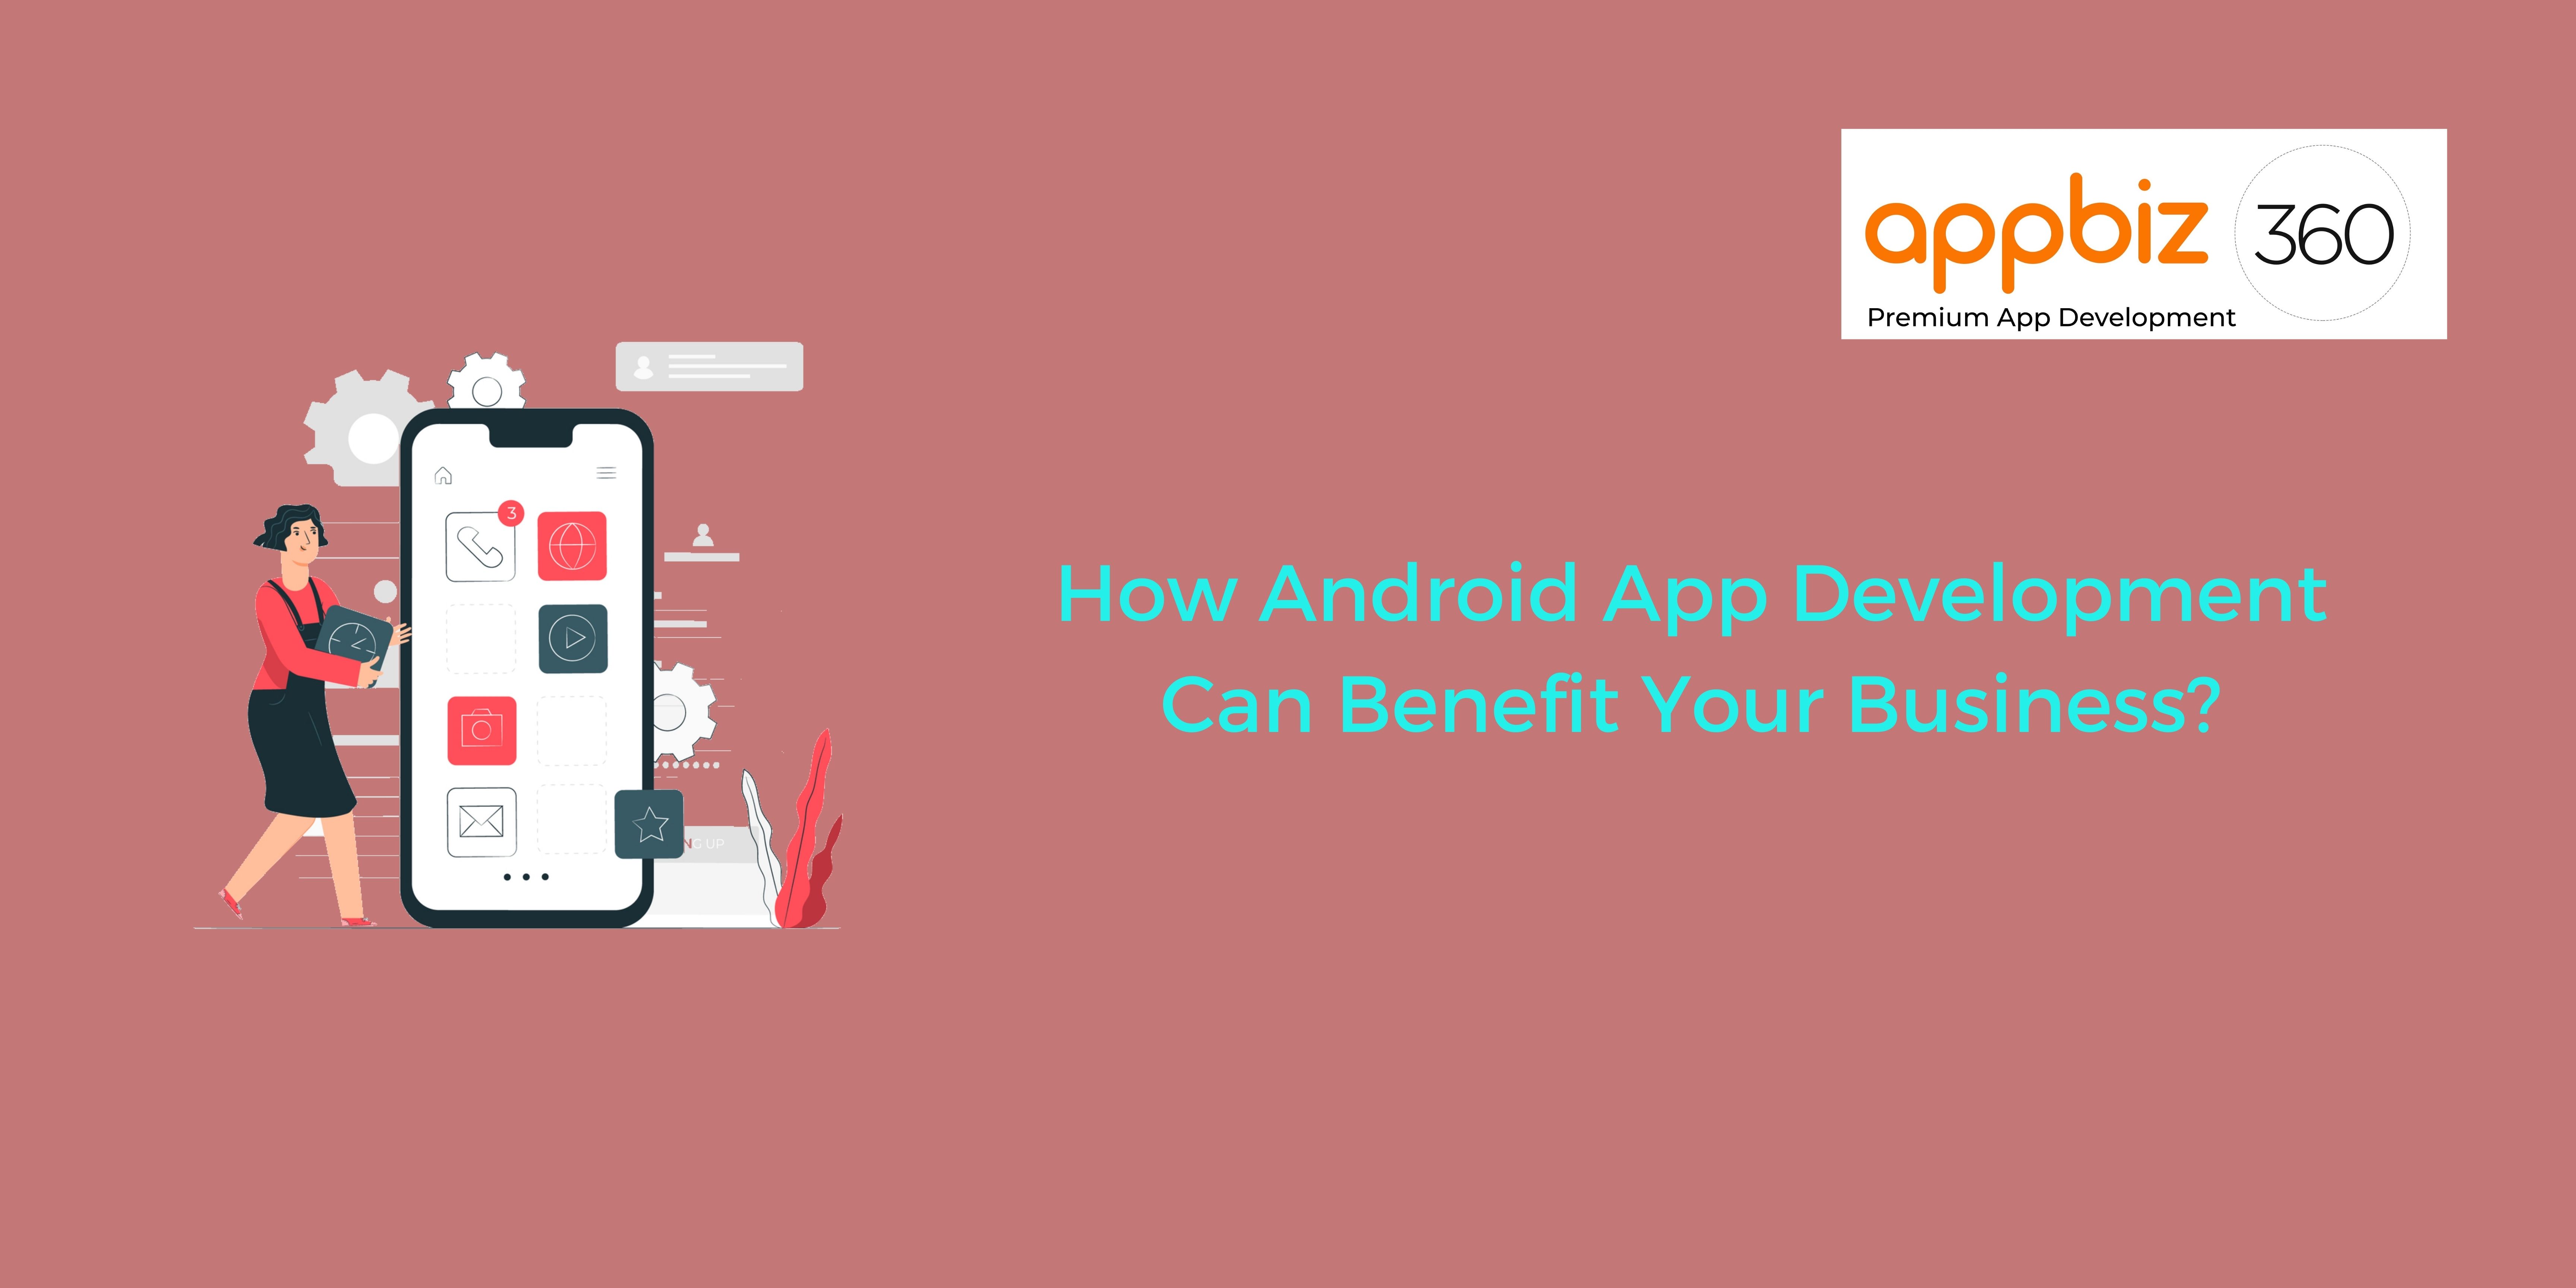 How Android App Development Can Benefit Your Business?